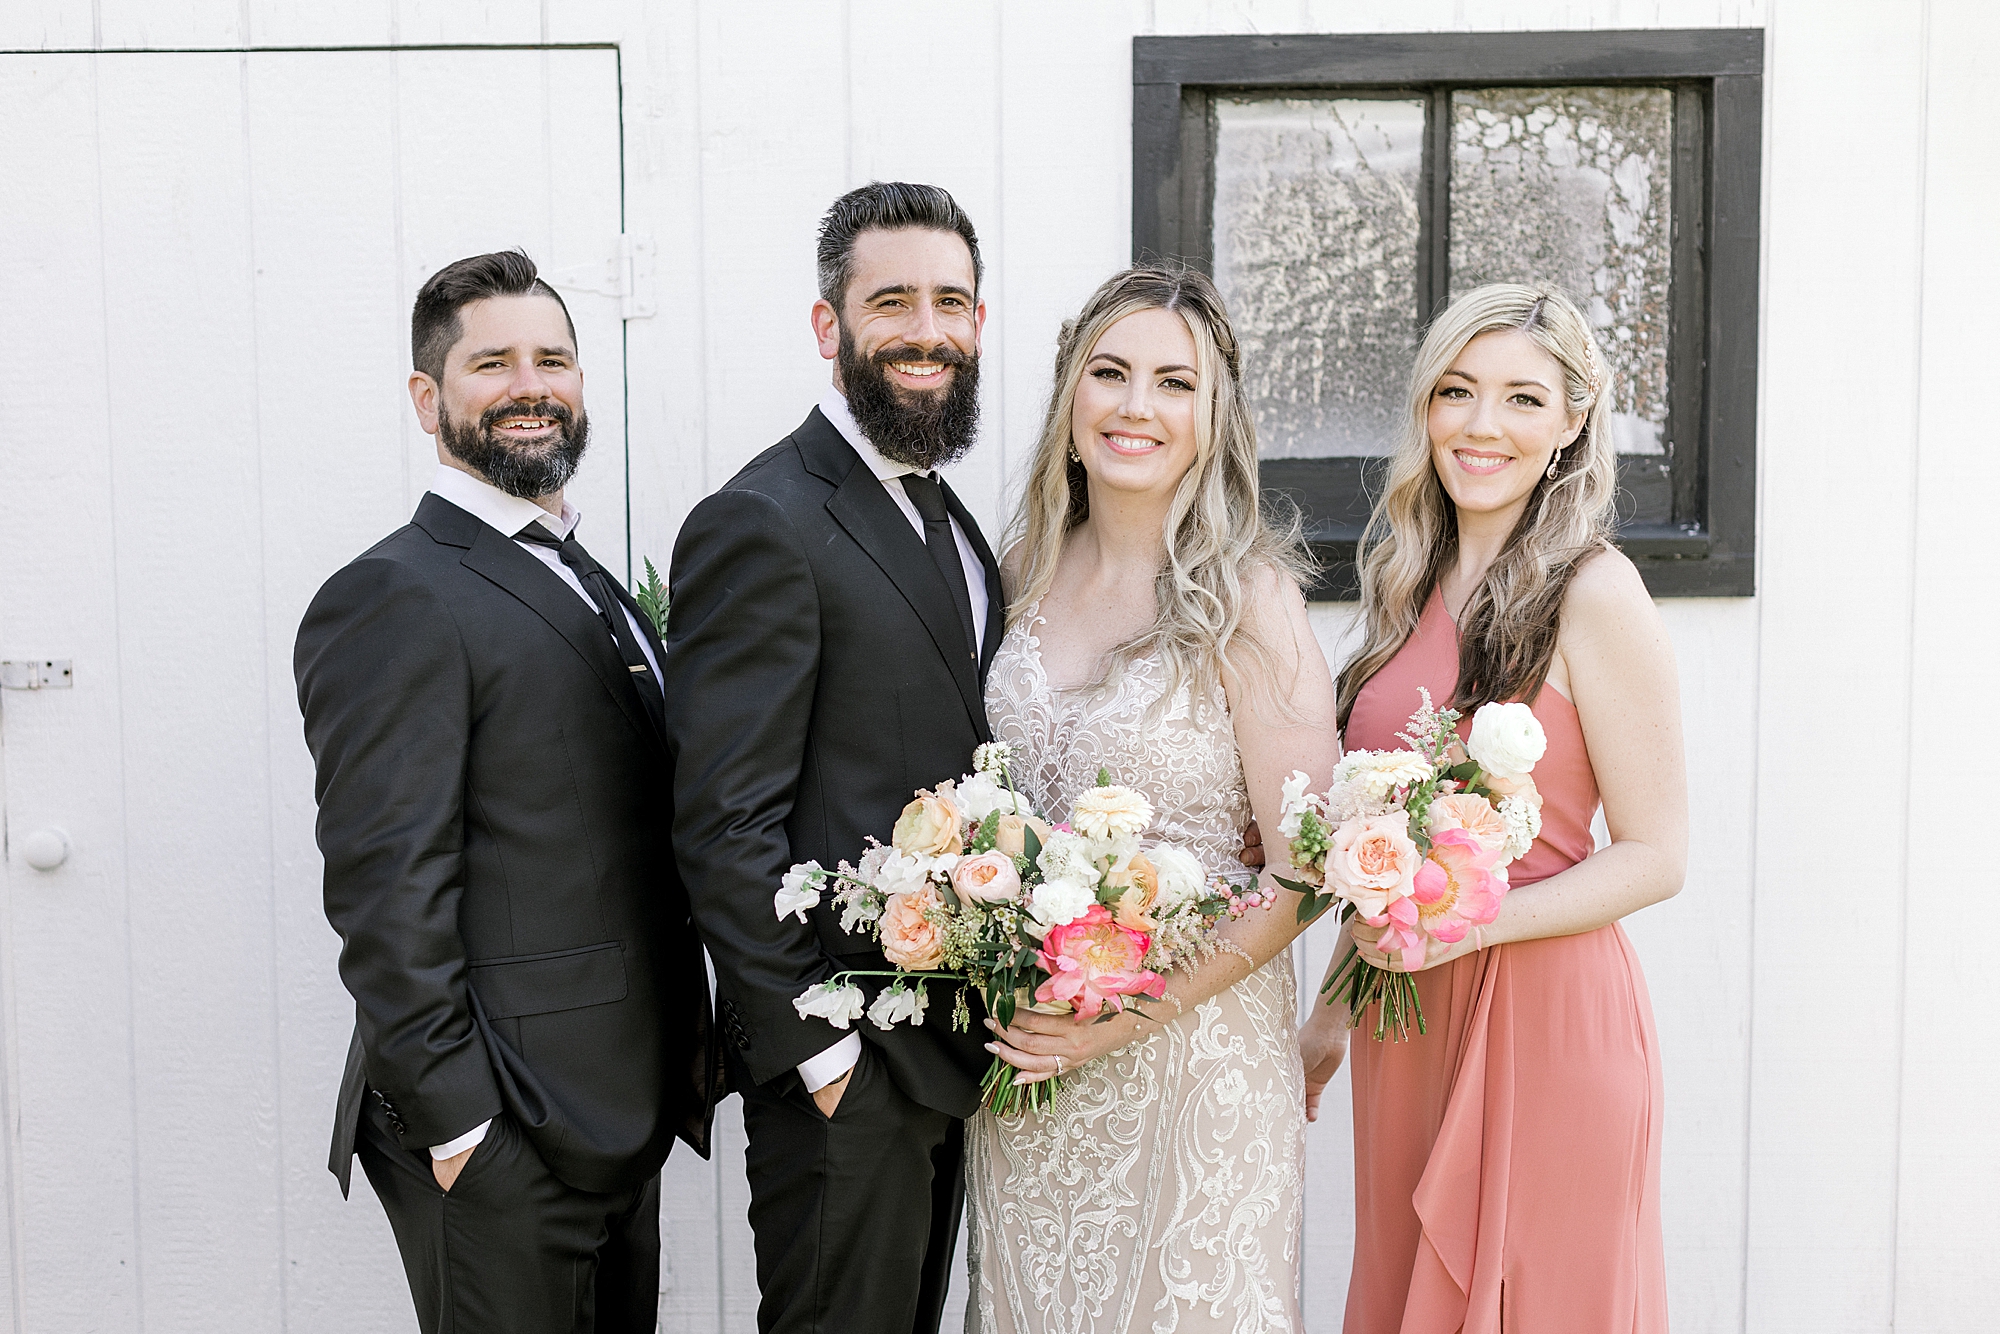 newlyweds stand with best man and maid of honor during intimate wedding at The Townsend Property